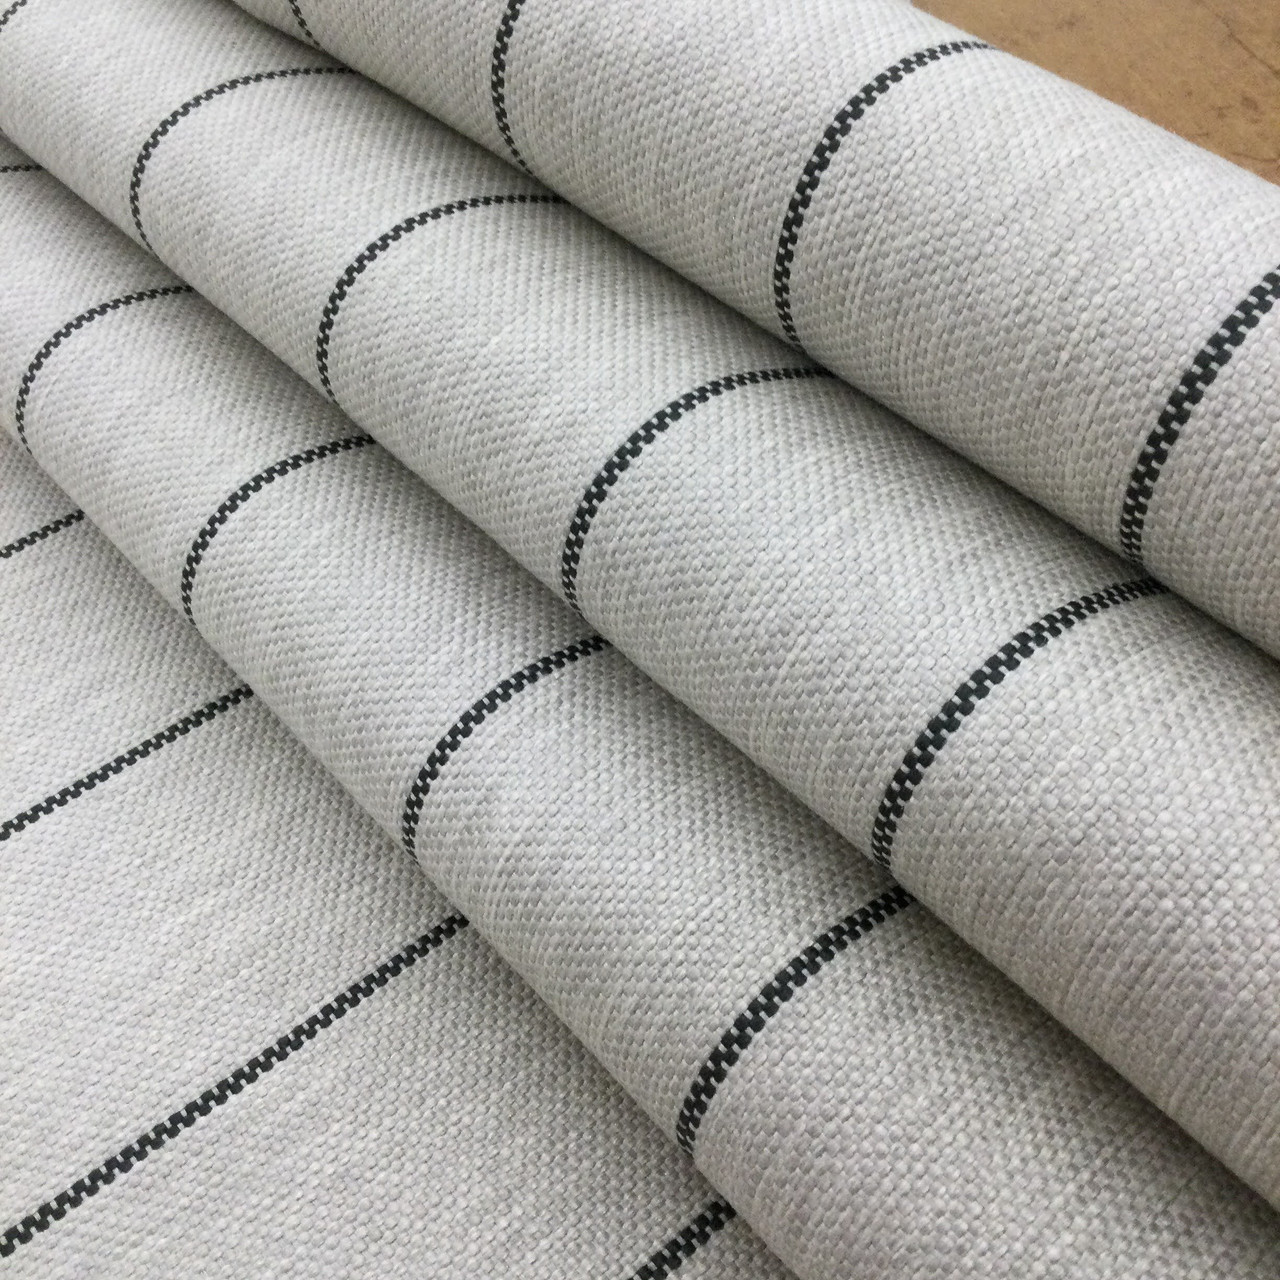 Thin Striped Fabric in Silver Grey and Charcoal, Upholstery / Slipcovers /  Drapery, 54 Wide, By the Yard